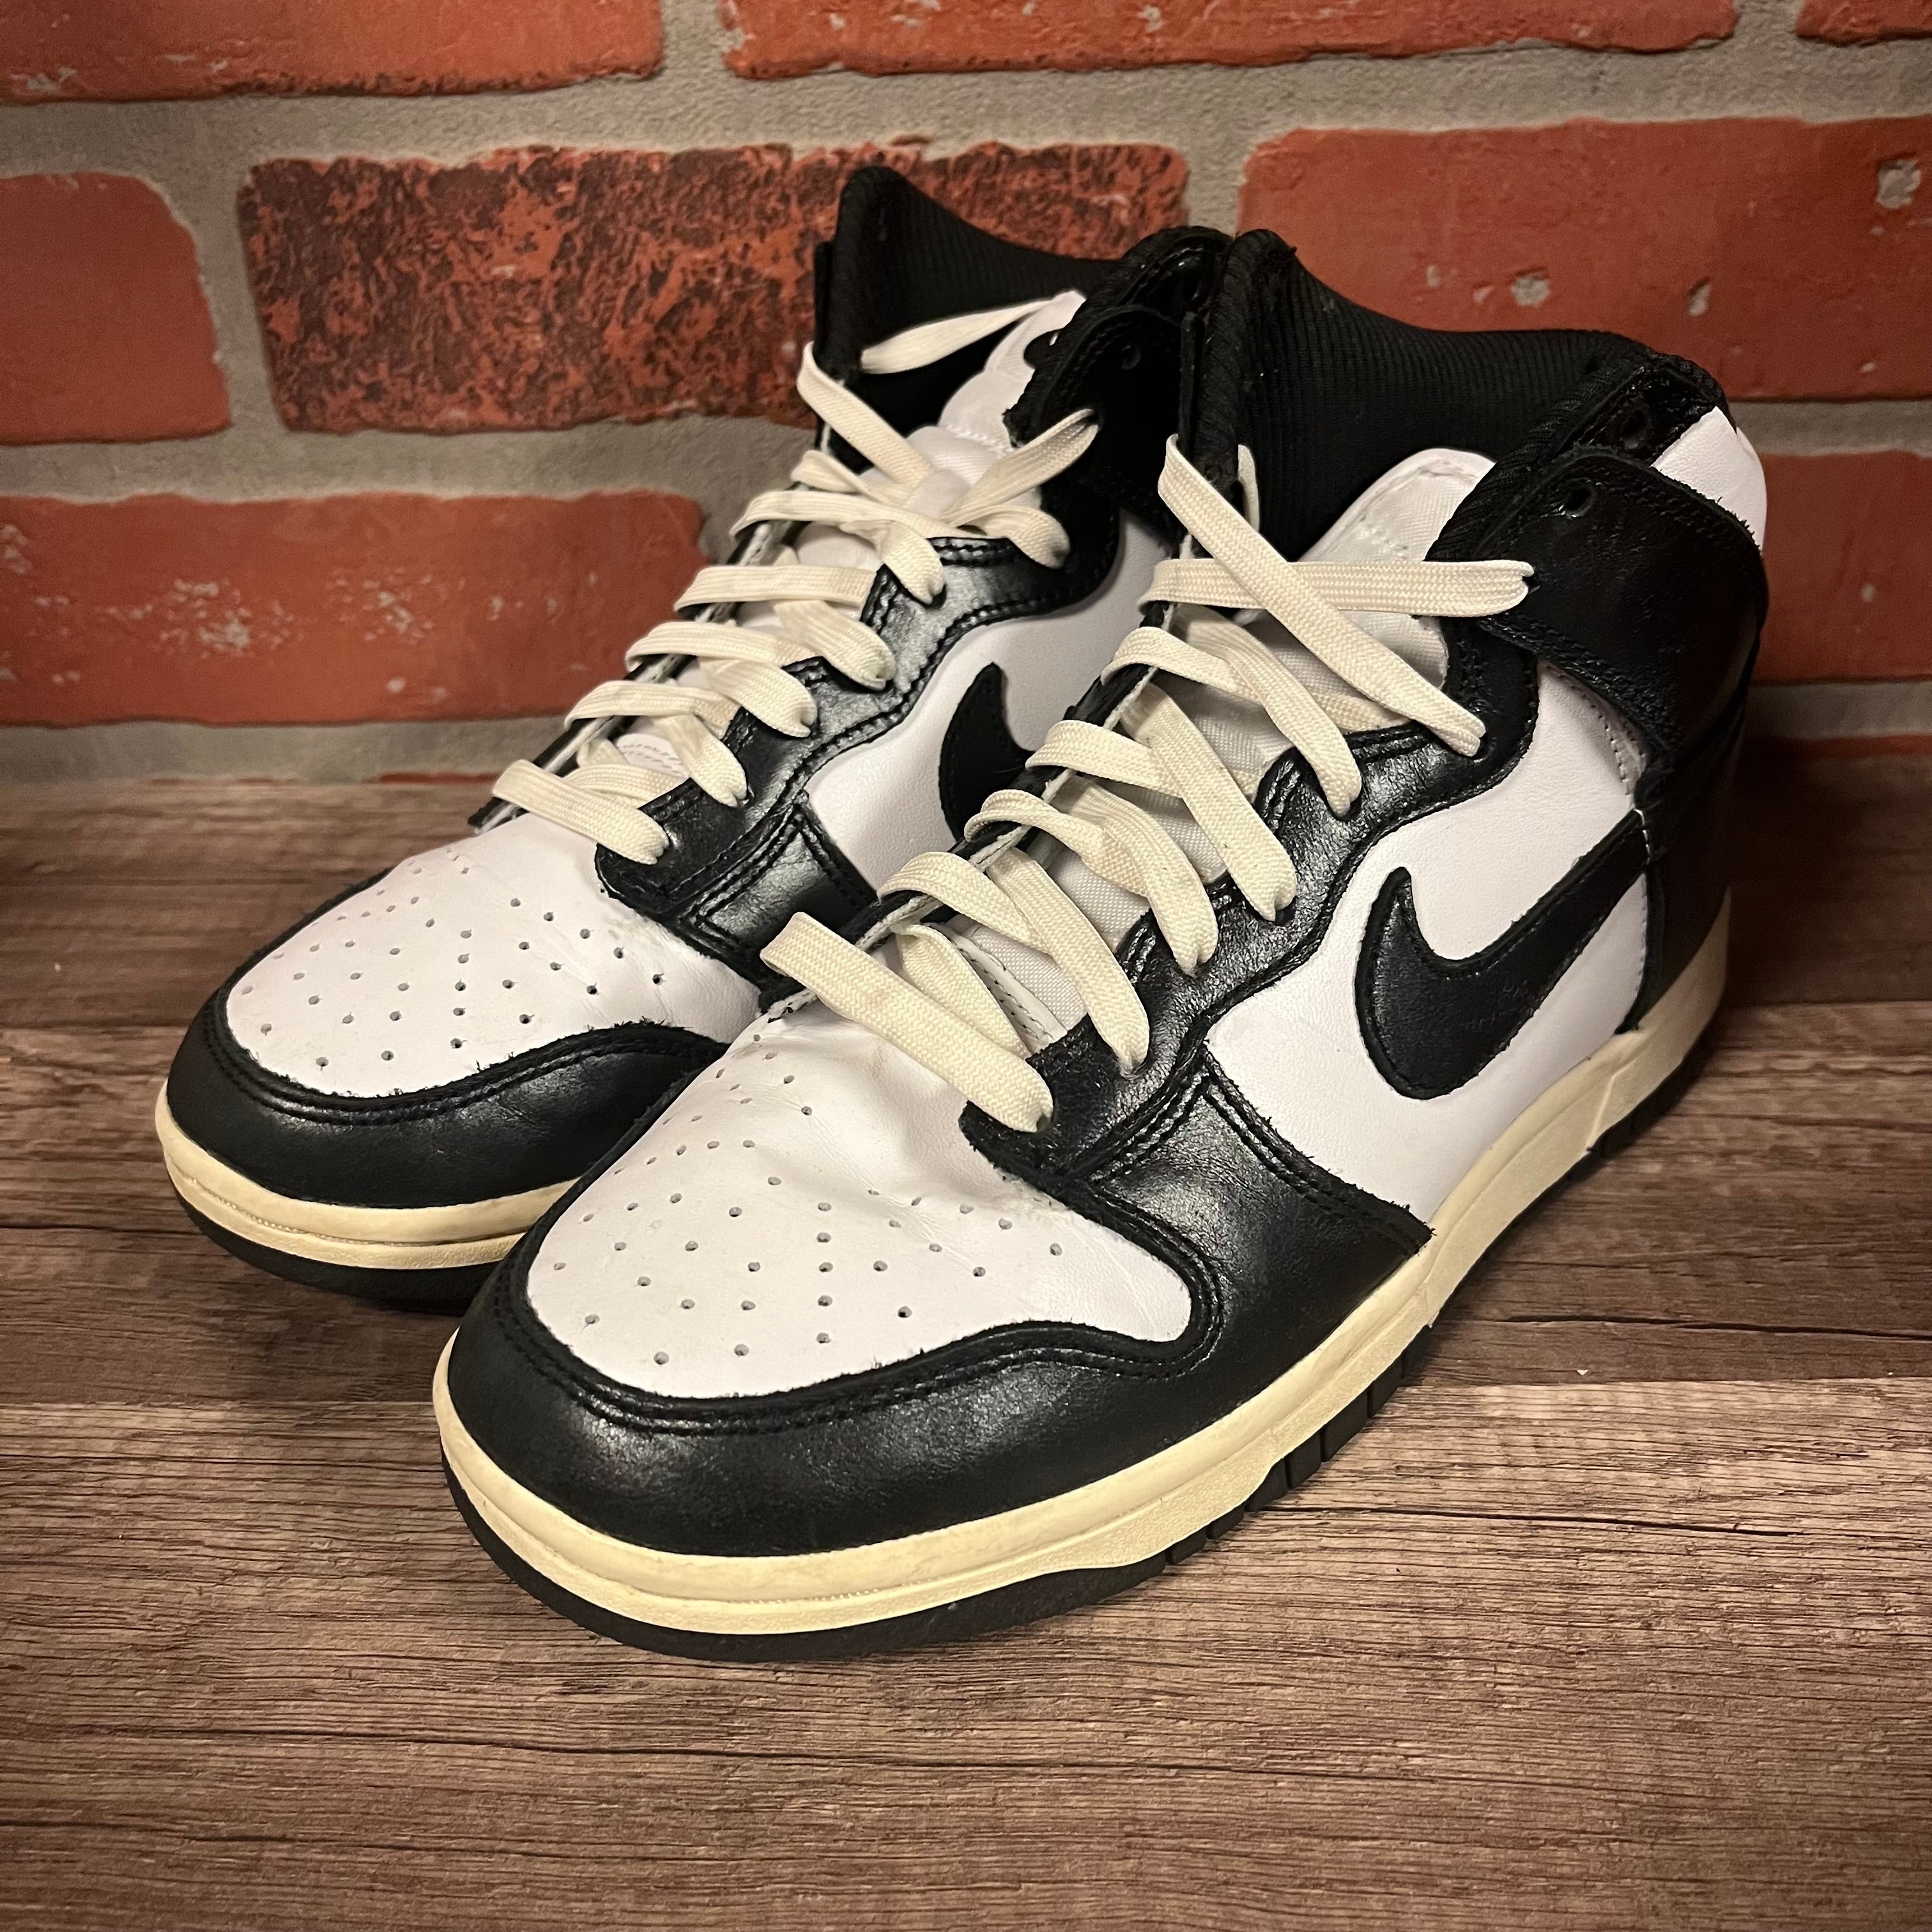 WMNS Nike Dunk High Vintage Black – Yesterday's Fits